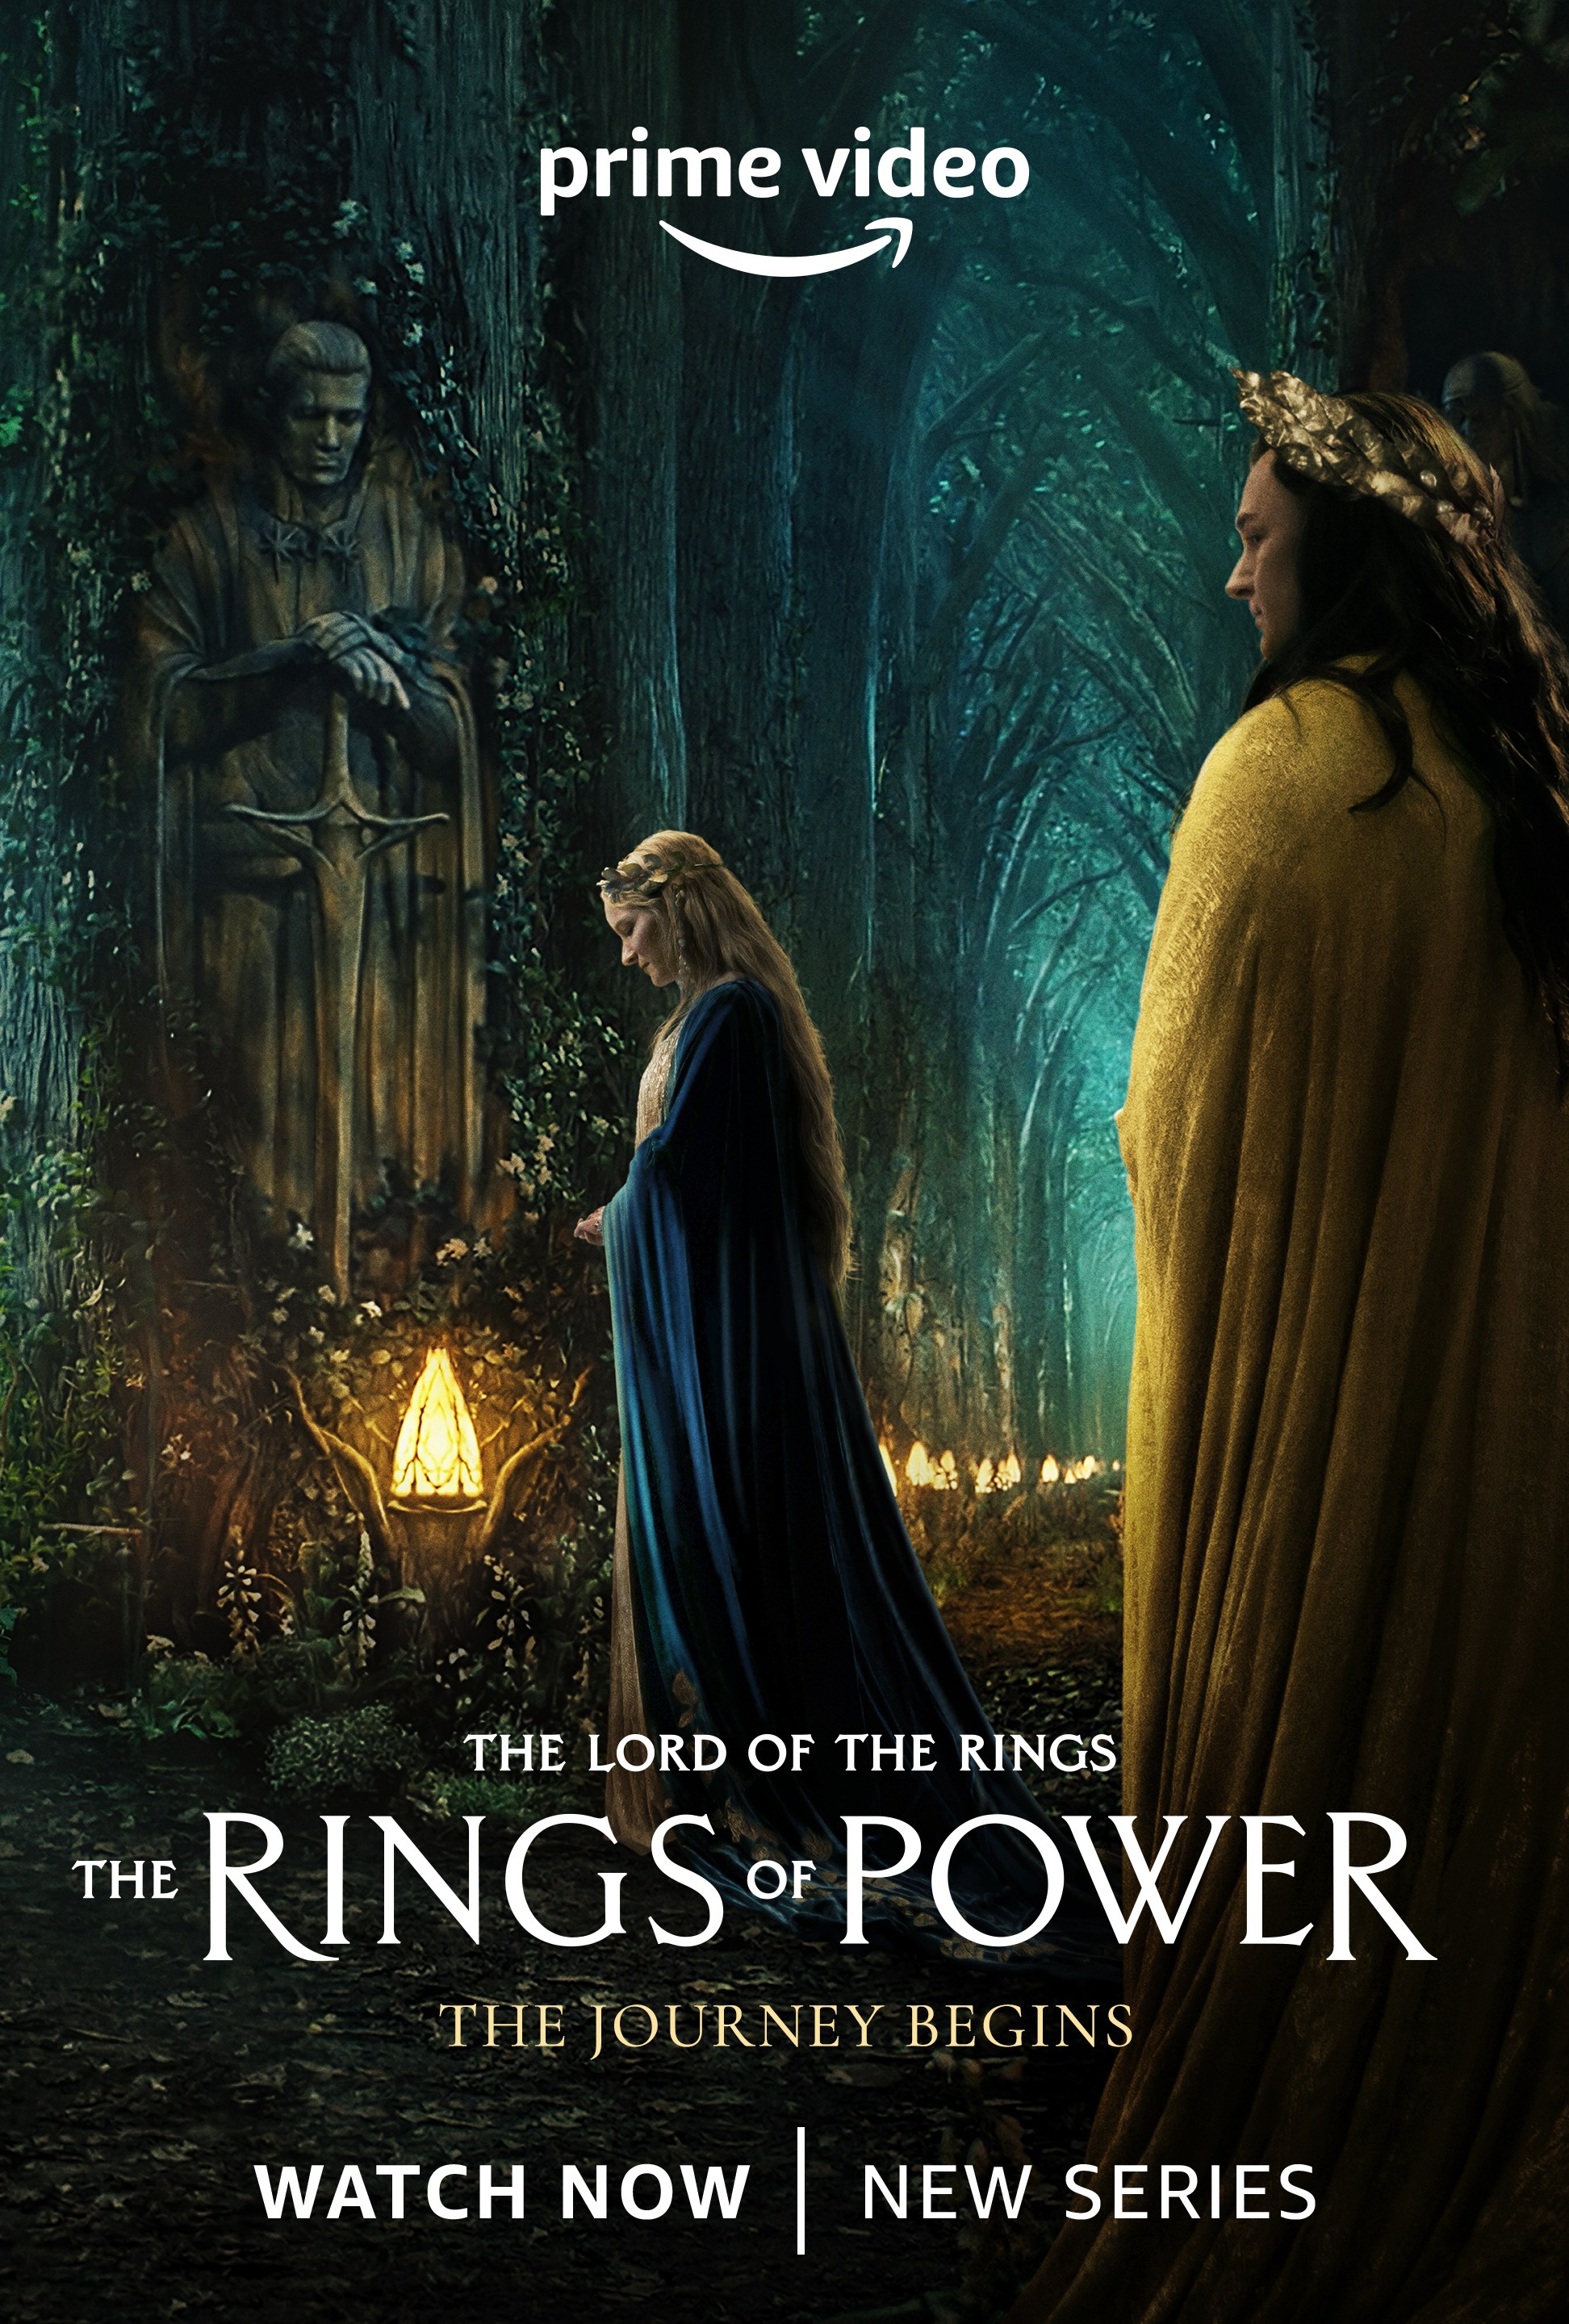 Behoort serveerster auditorium The Lord of the Rings: The Rings of Power - Rotten Tomatoes